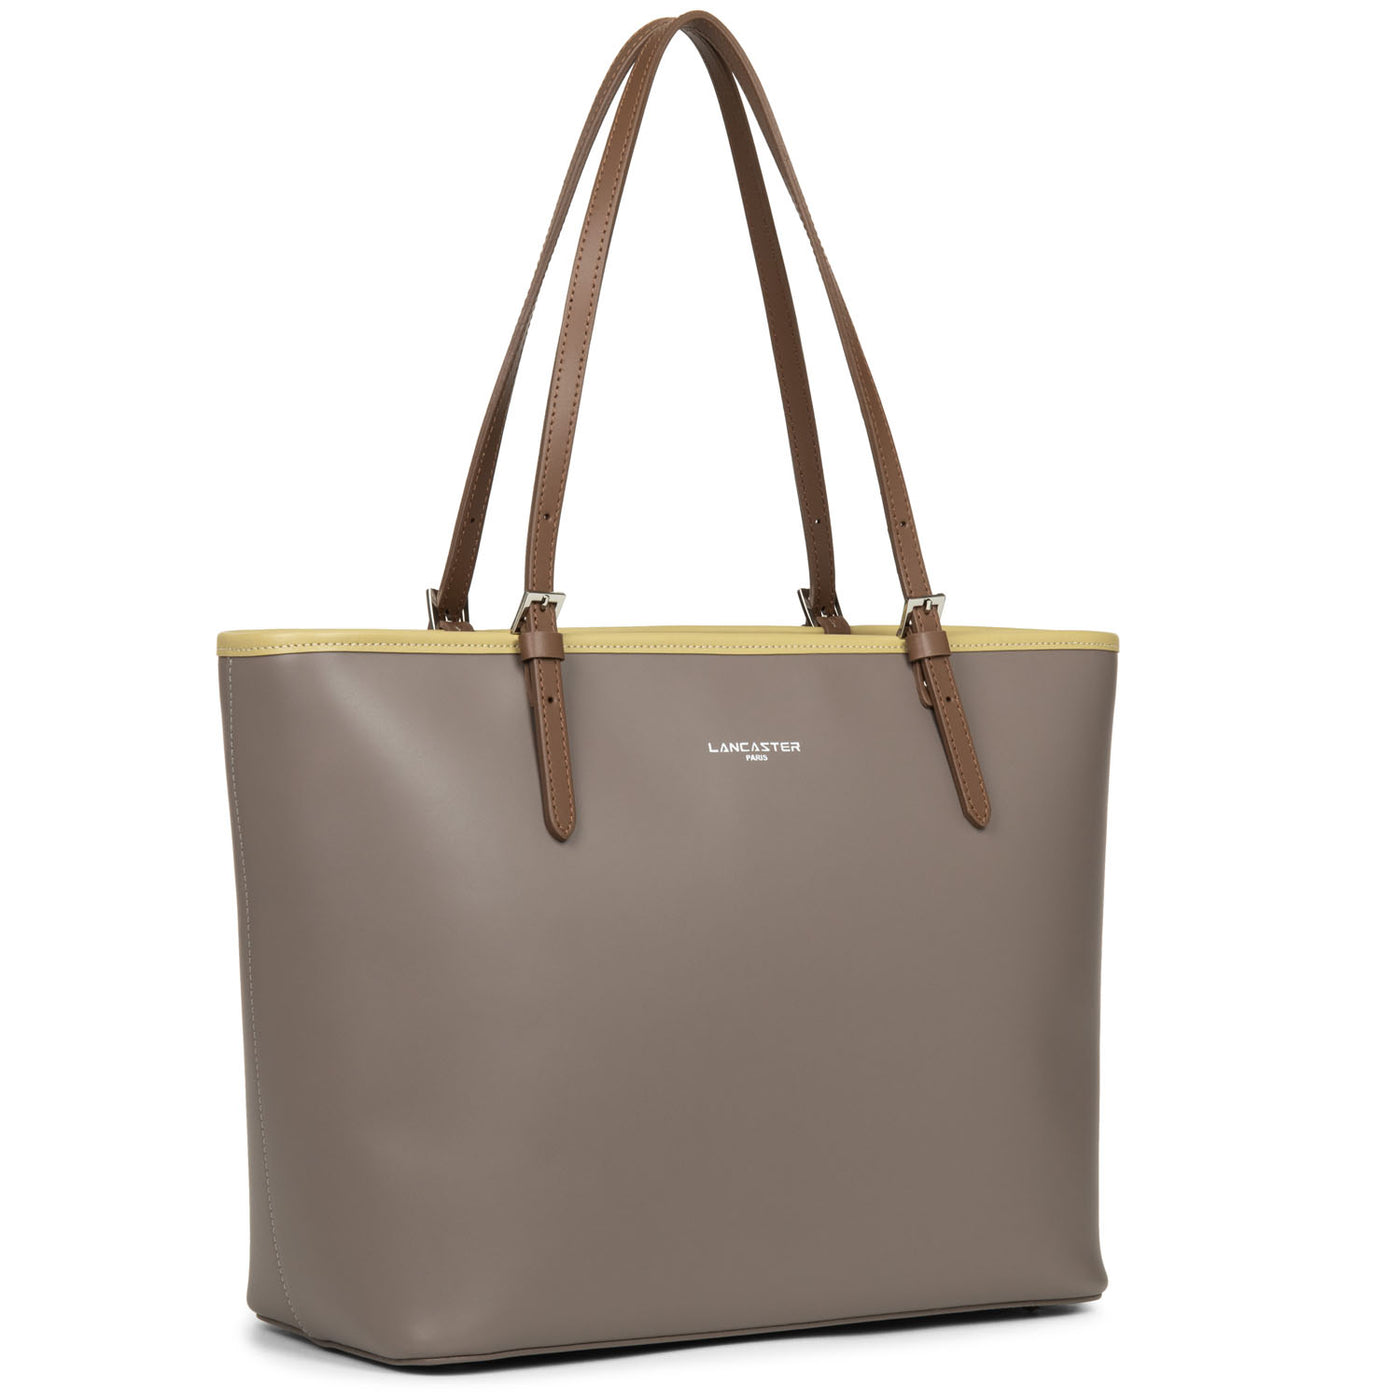 grand sac cabas épaule - smooth #couleur_taupe-gingembre-vison